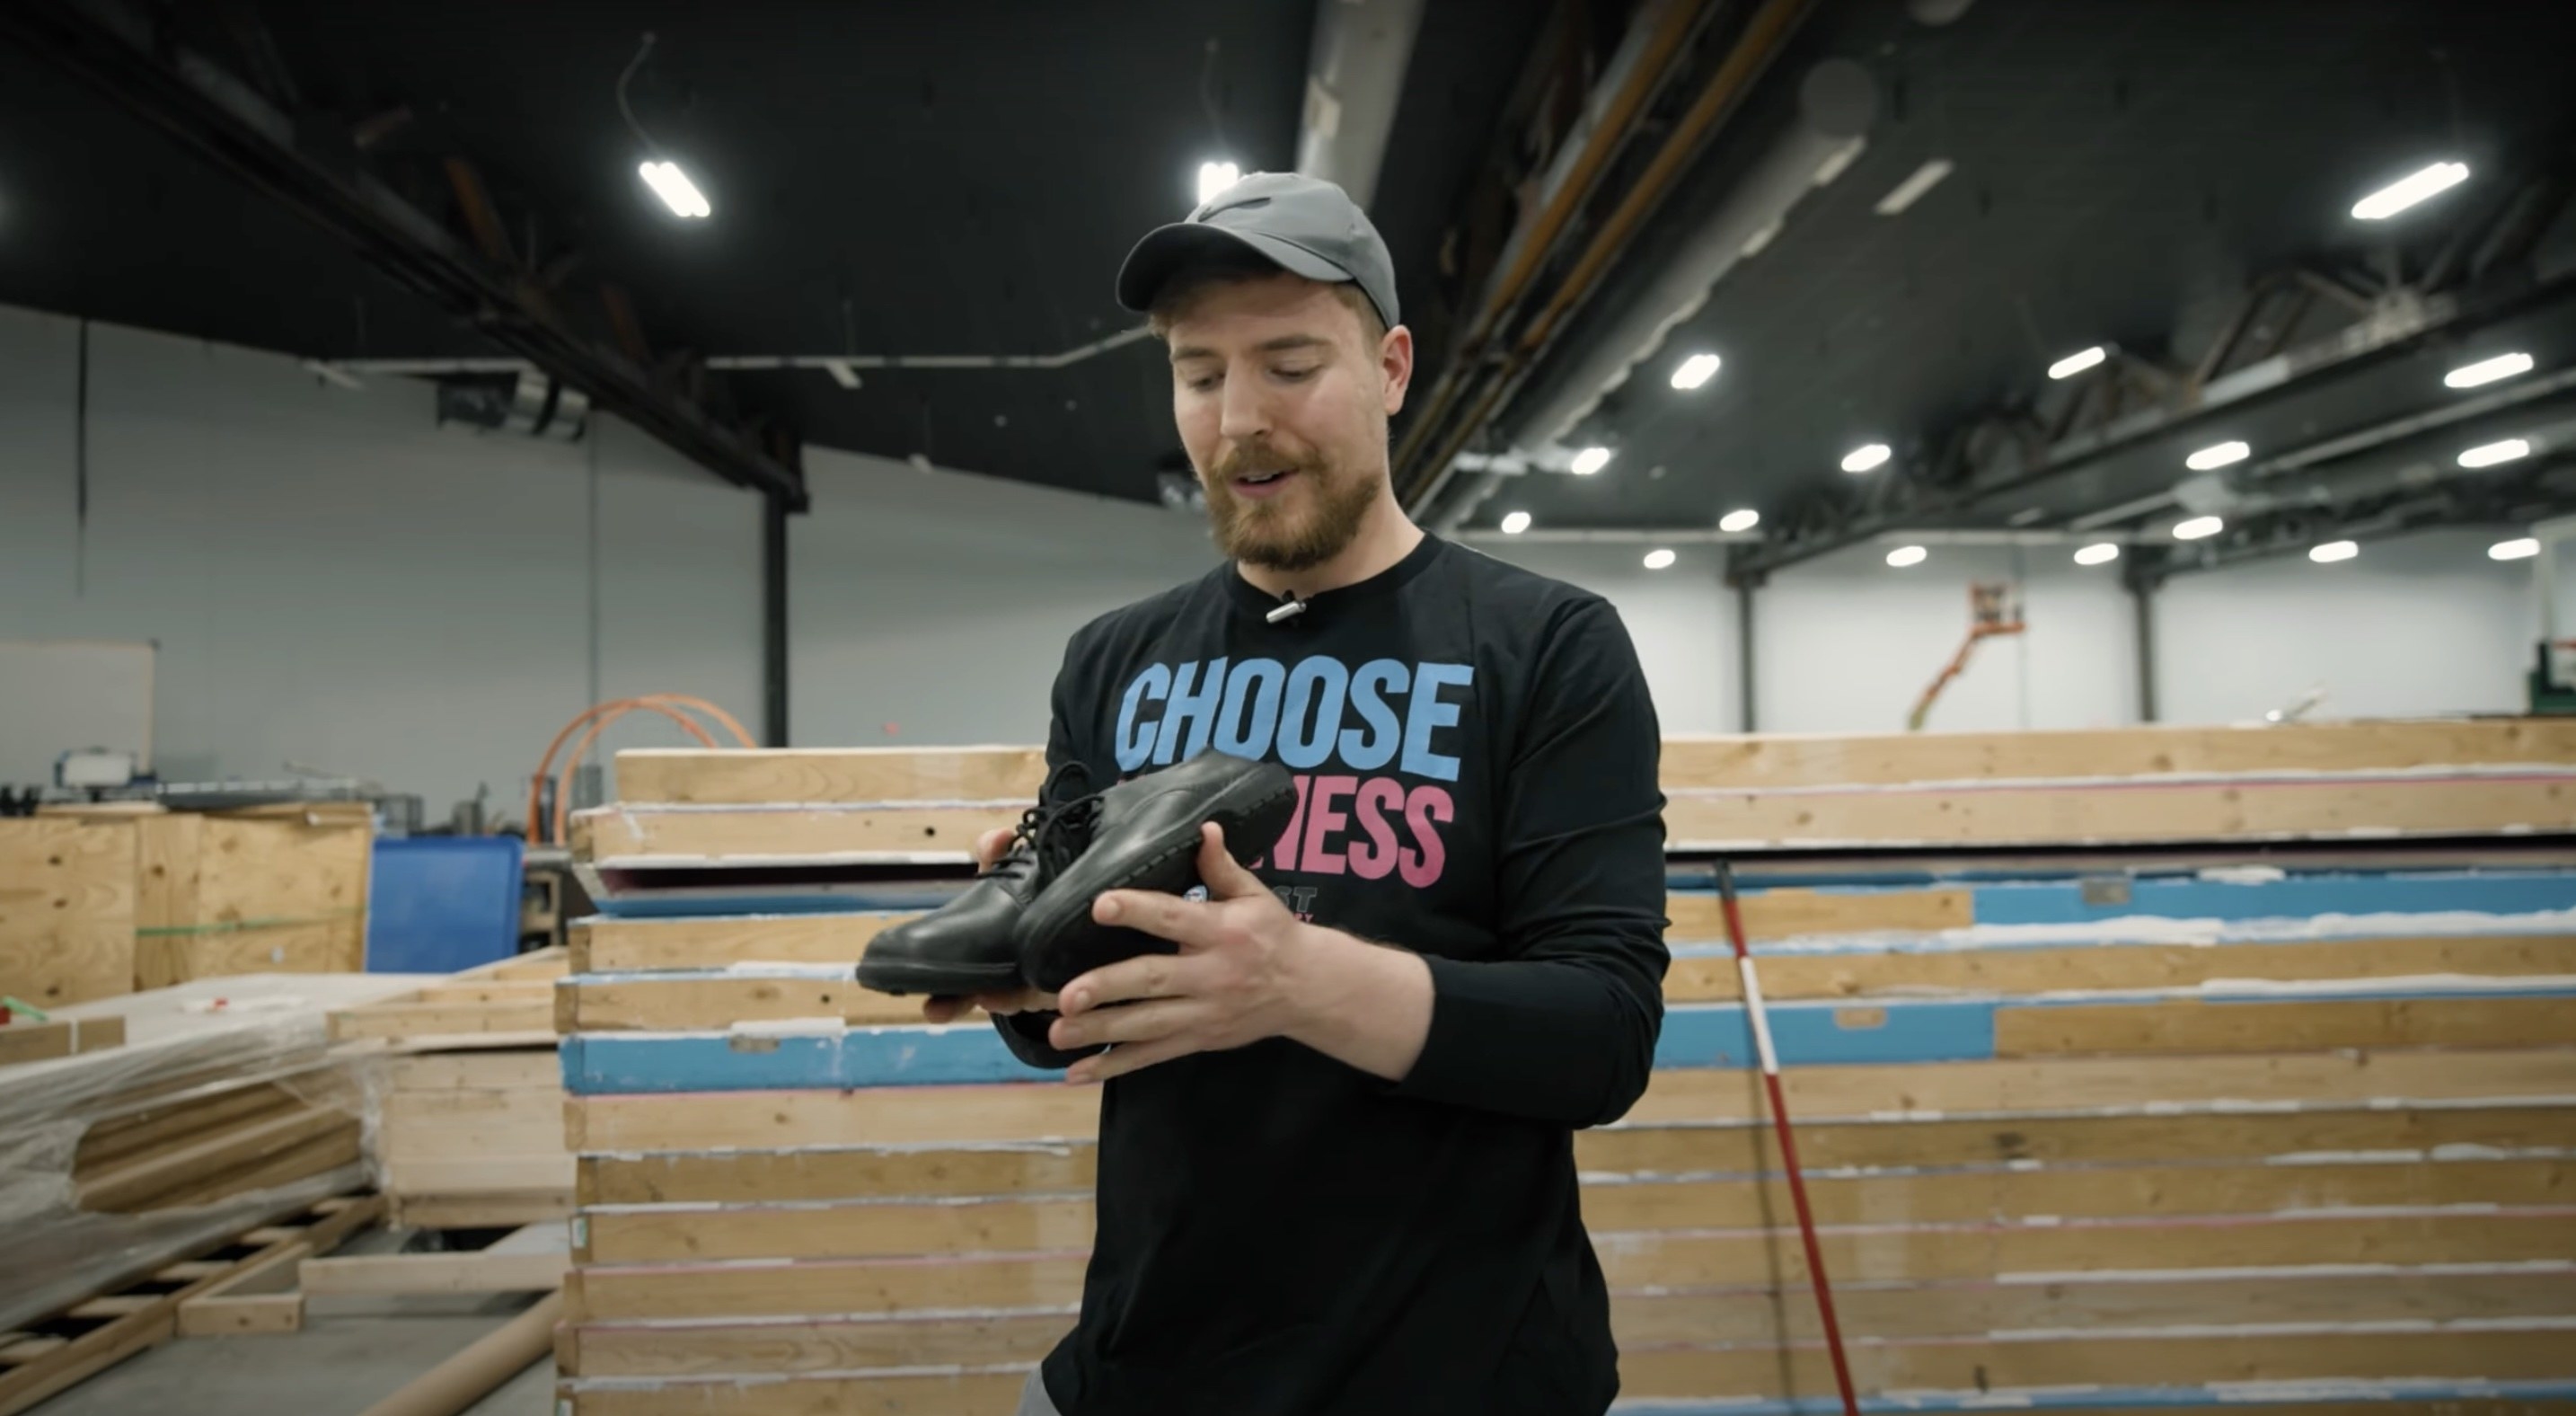 MrBeast inside a warehouse holding a pair of shoes